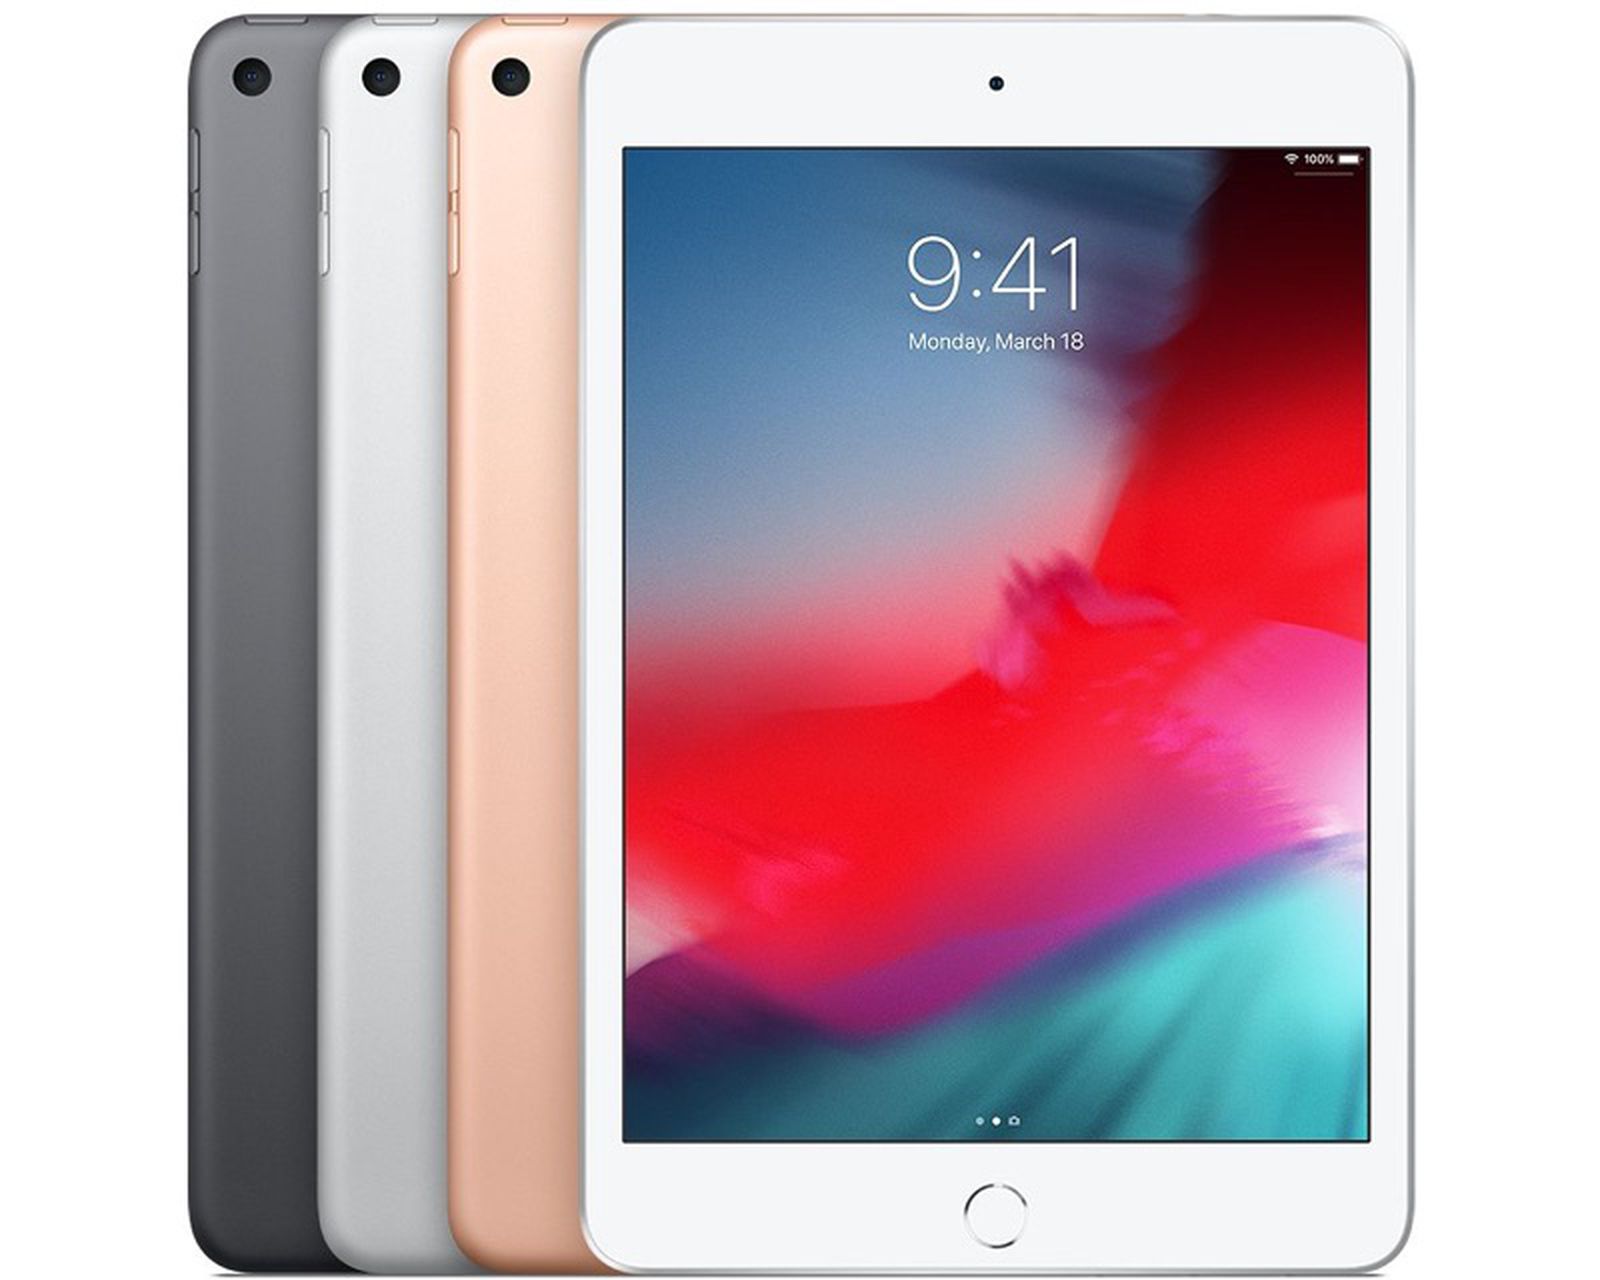 Sixth generation iPad mini with 8.4-inch screen with thinner bezels, scheduled for March